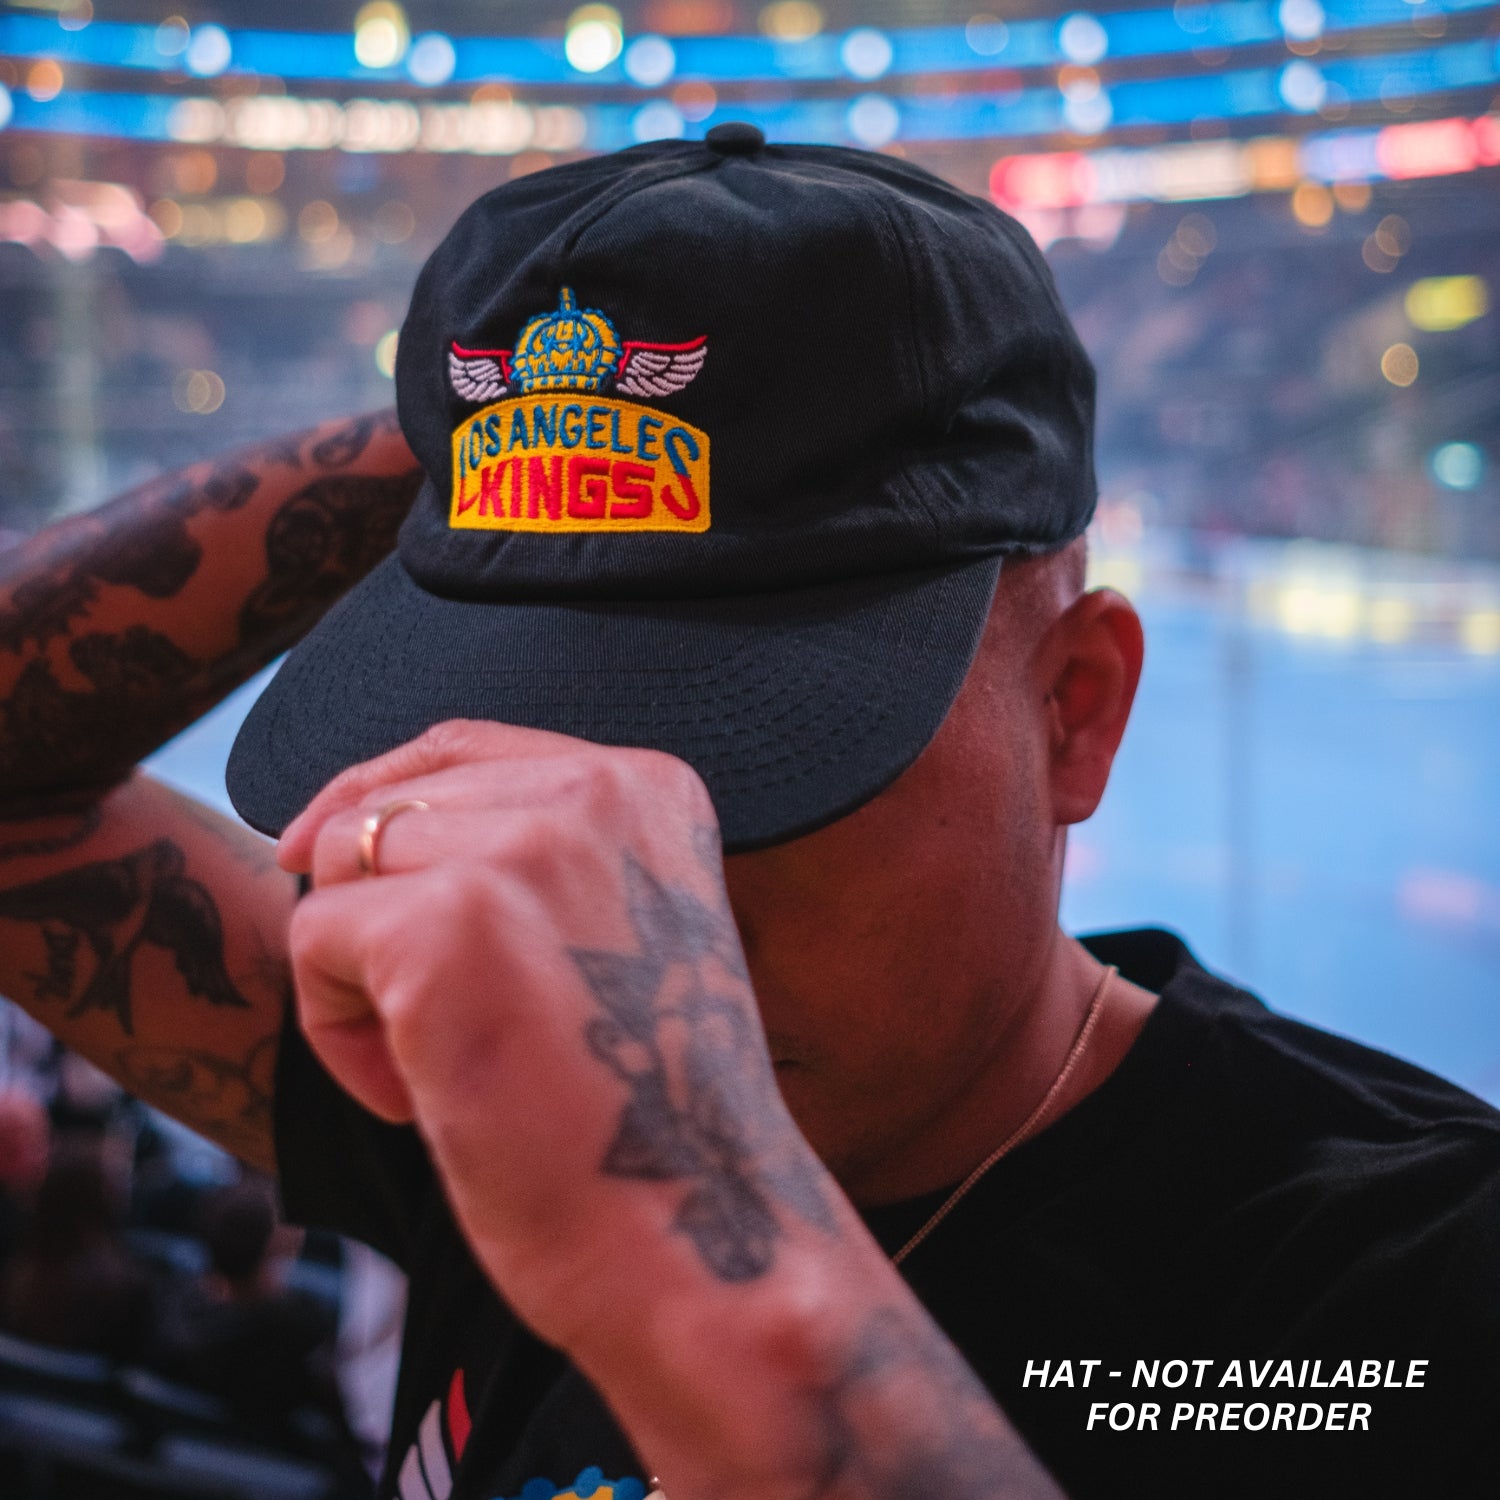 Immerse yourself in the vibrant convergence of hockey and culture as part of the LA Kings 2023-24 Filipino Heritage Night! Join the LA Kings in the celebration of Filipino Heritage and embrace roots in an unforgettable evening that blends the excitement of a Kings game with the richness of tradition.   As part of the Kings special game over the weekend, we're proud to introduce the KINGS X VG X FILIPINO HERITAGE Collection designed by local artist DJ Javier. This collection represents the fighting spirit of the Filipino people mixed with the LA Kings energy and attitude. Take advantage of the opportunity to pre-order these event exclusive and limited edition items, ensuring you have a piece of this unique celebration to cherish.